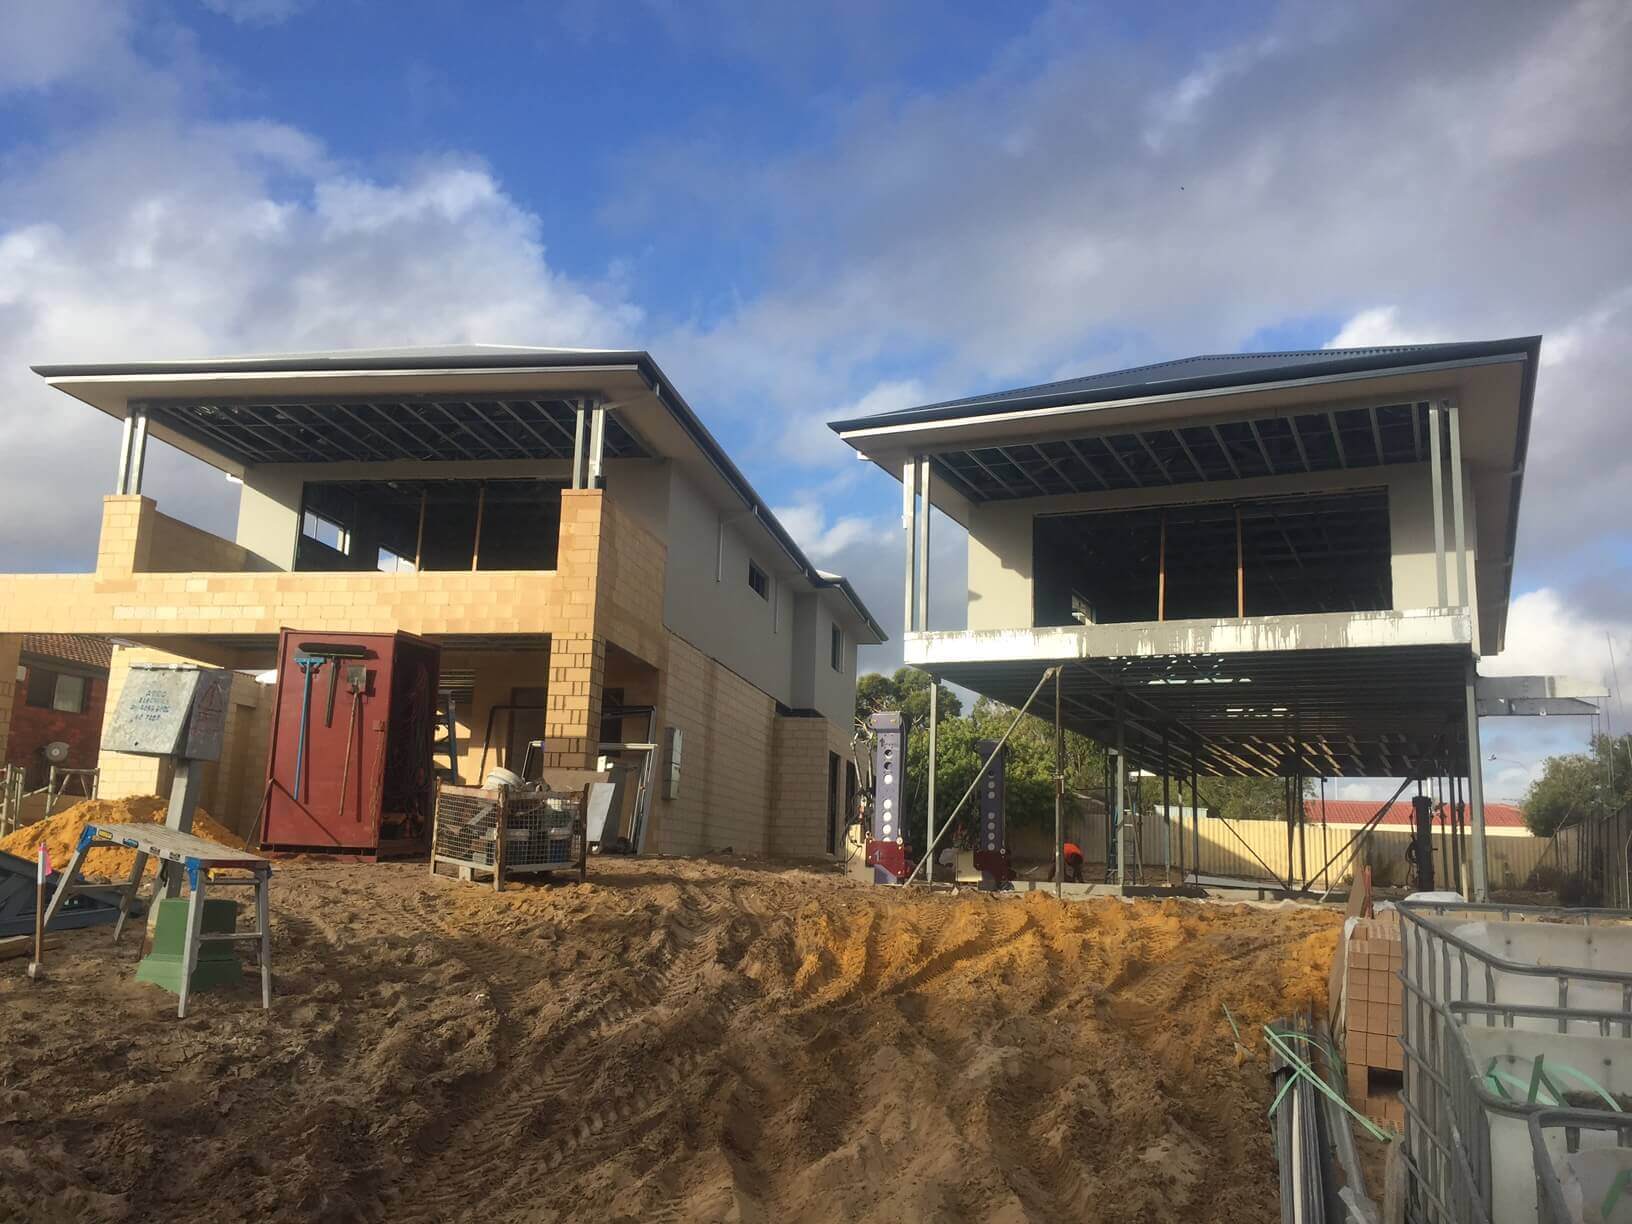 Two Homes on Millimumul Way Lifted - J-Jack Building Systems